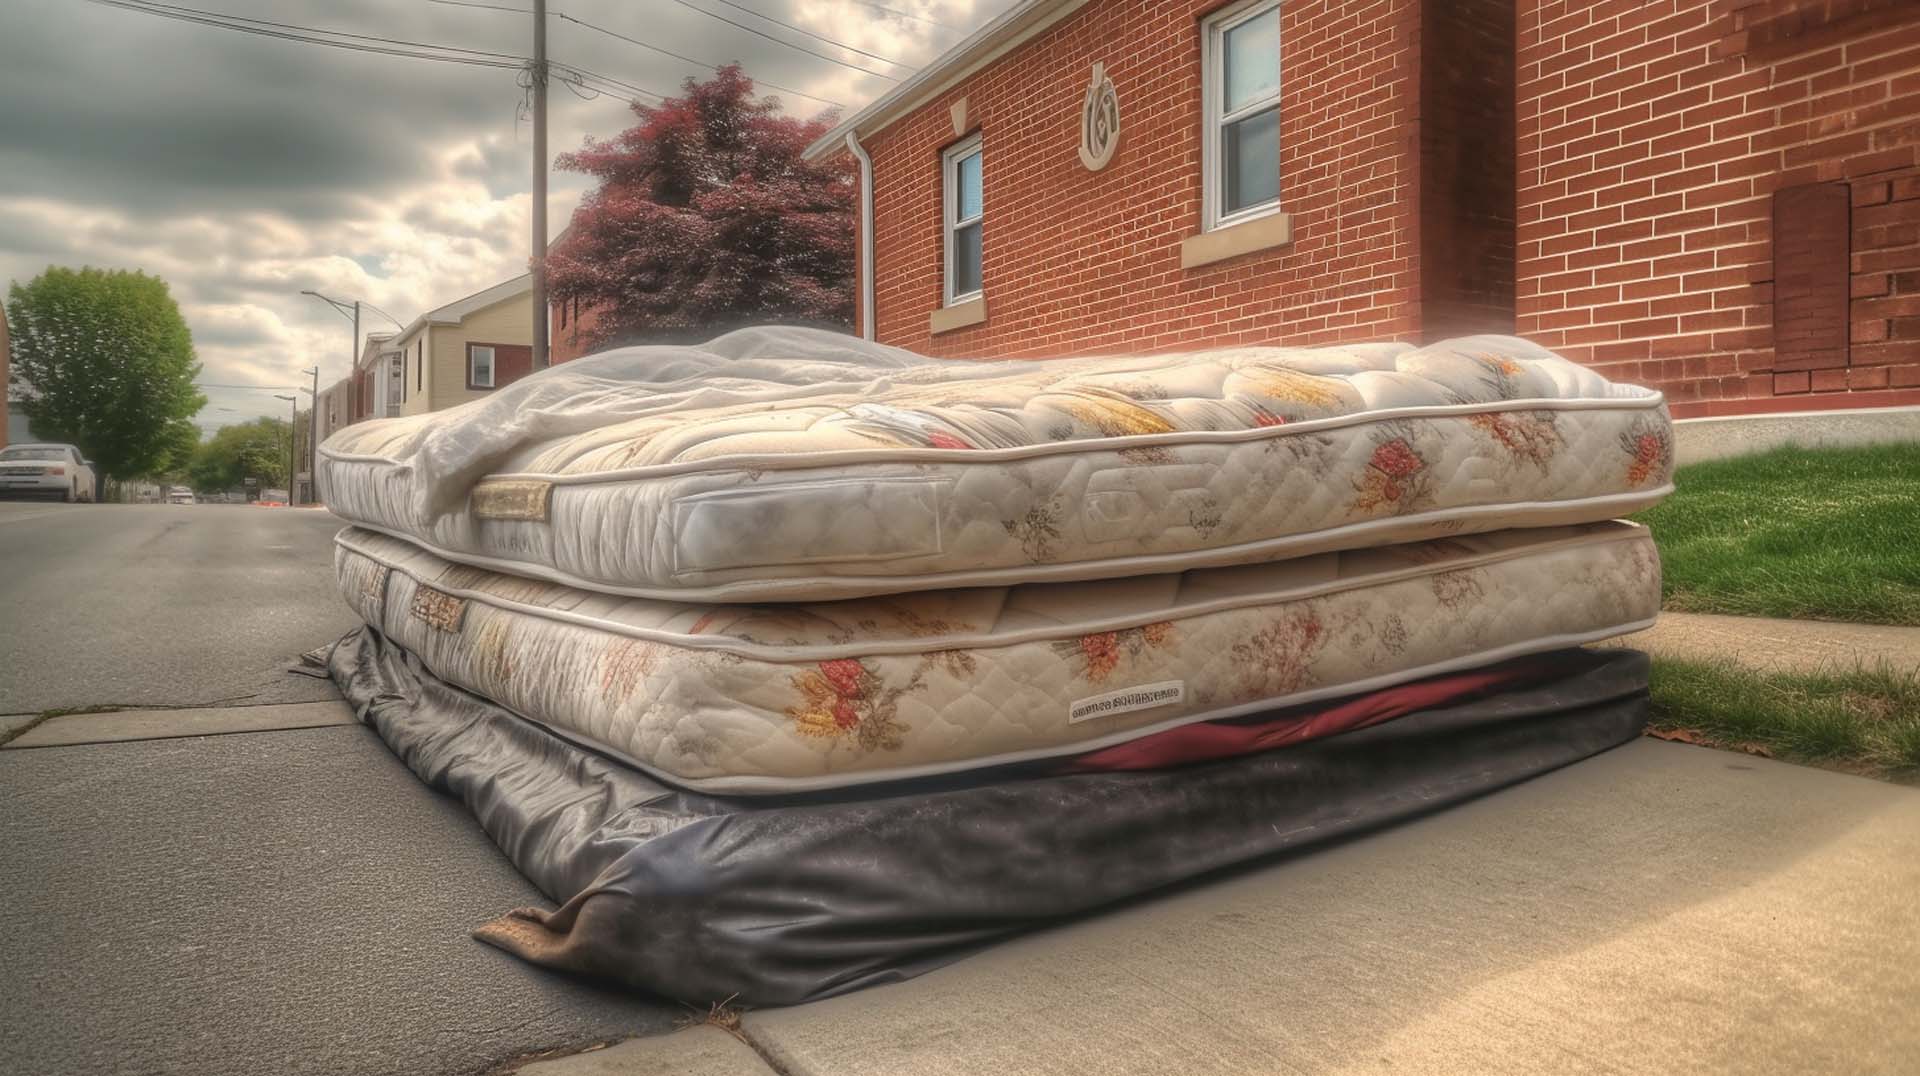 You can make sure your mattress removal is done properly by hiring a professional service in Steinbach